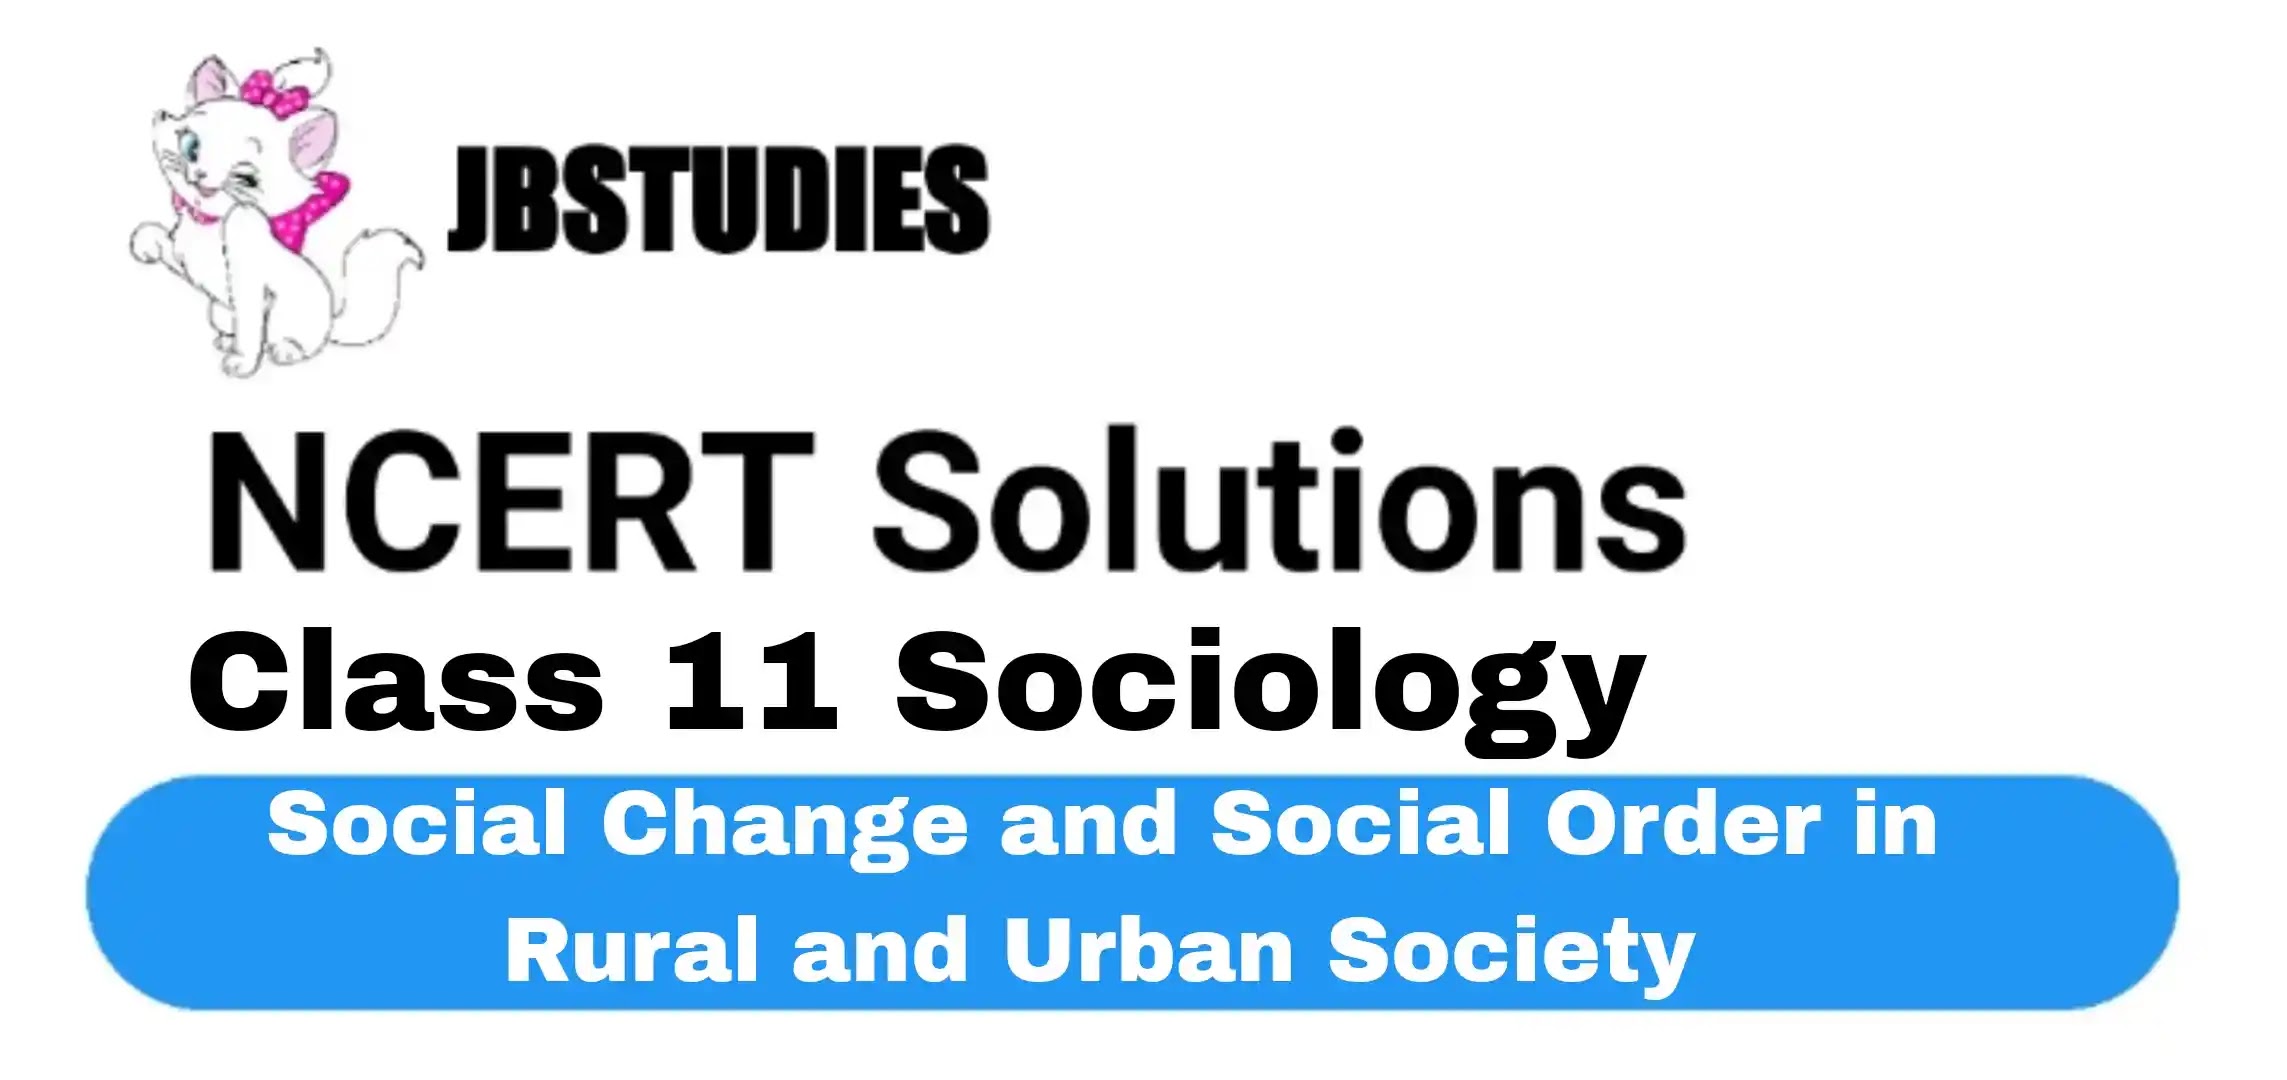 Solutions Class 11 Sociology Chapter-2 Social Change and Social Order in Rural and Urban Society